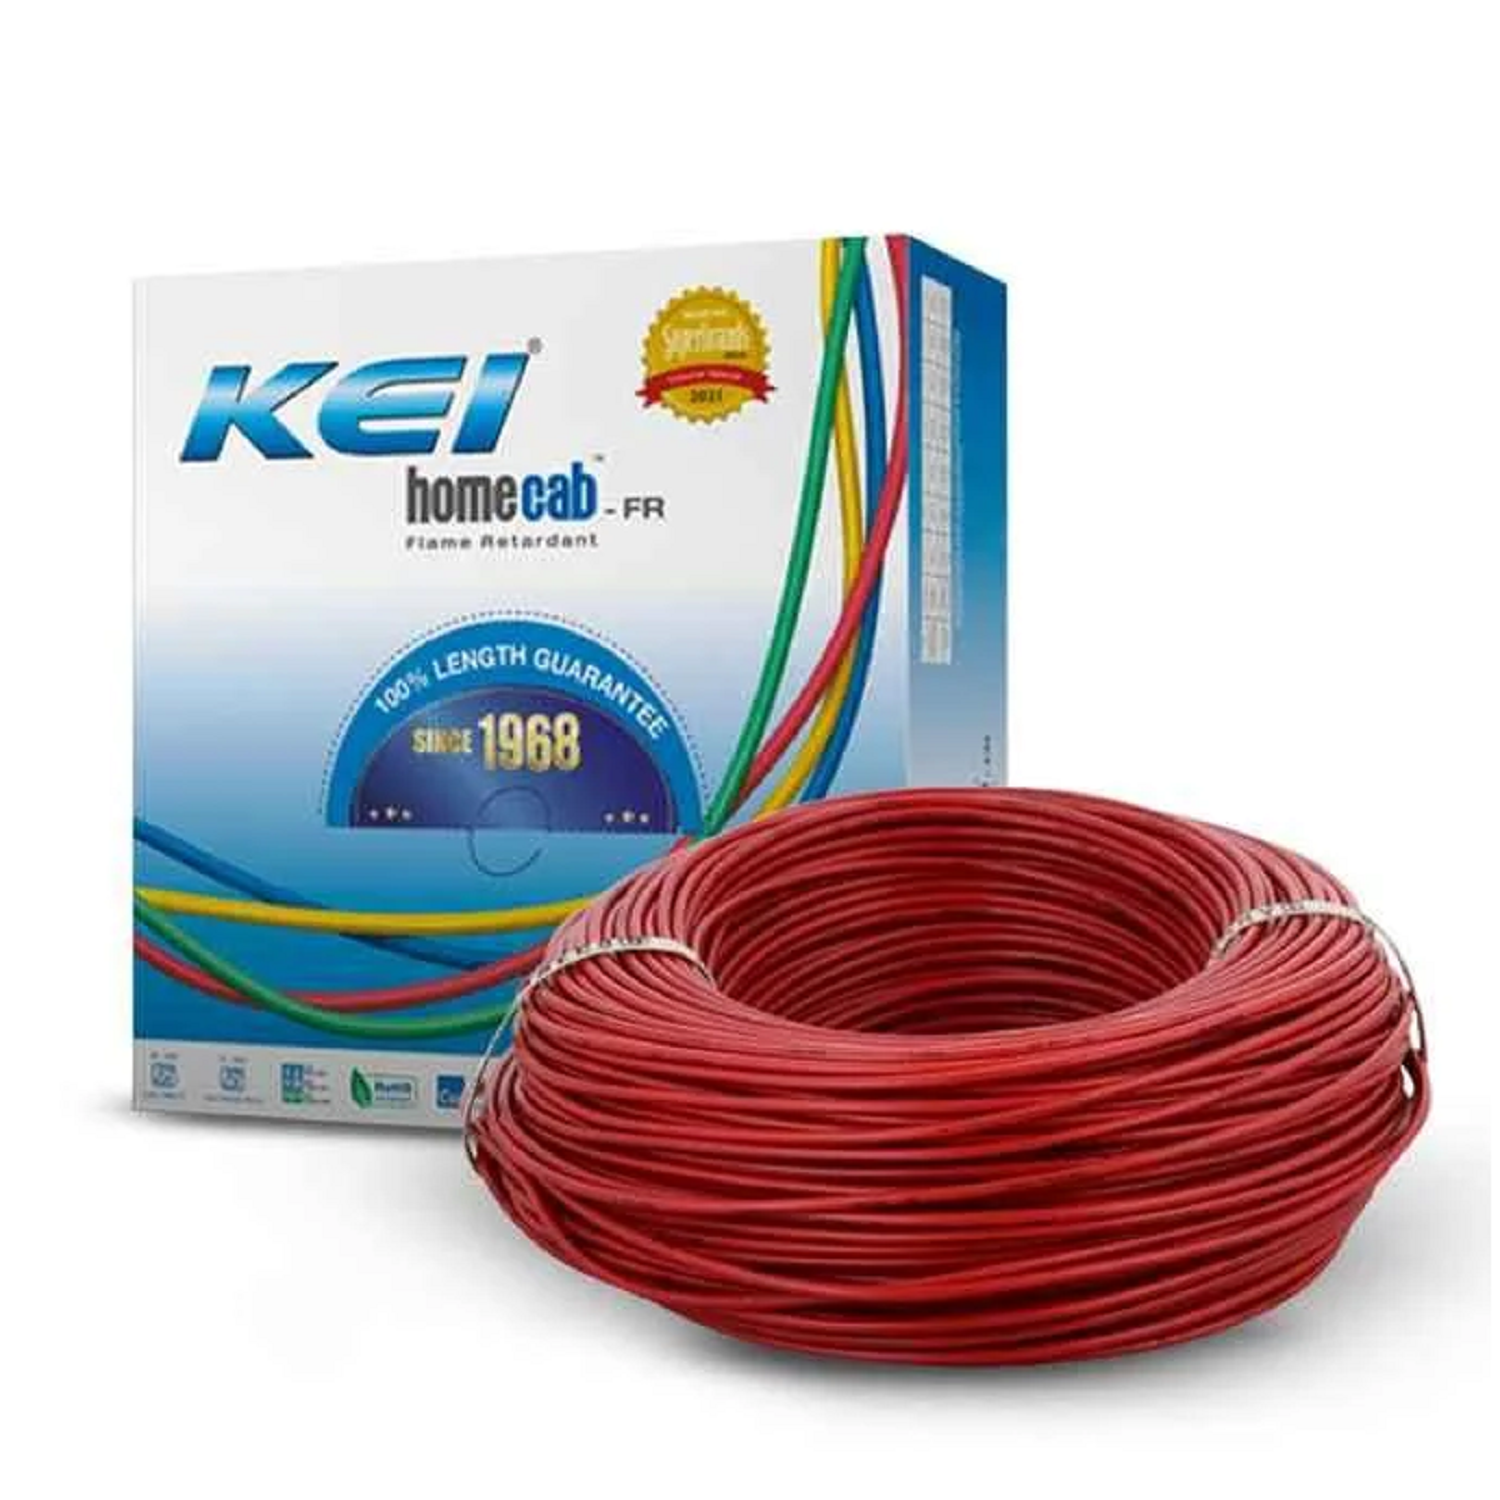 4.0 Sqmm KEI FR Single Core Copper Wire (90 Mtr) With PVC Insulated for House 38 Industrial Uses (Re